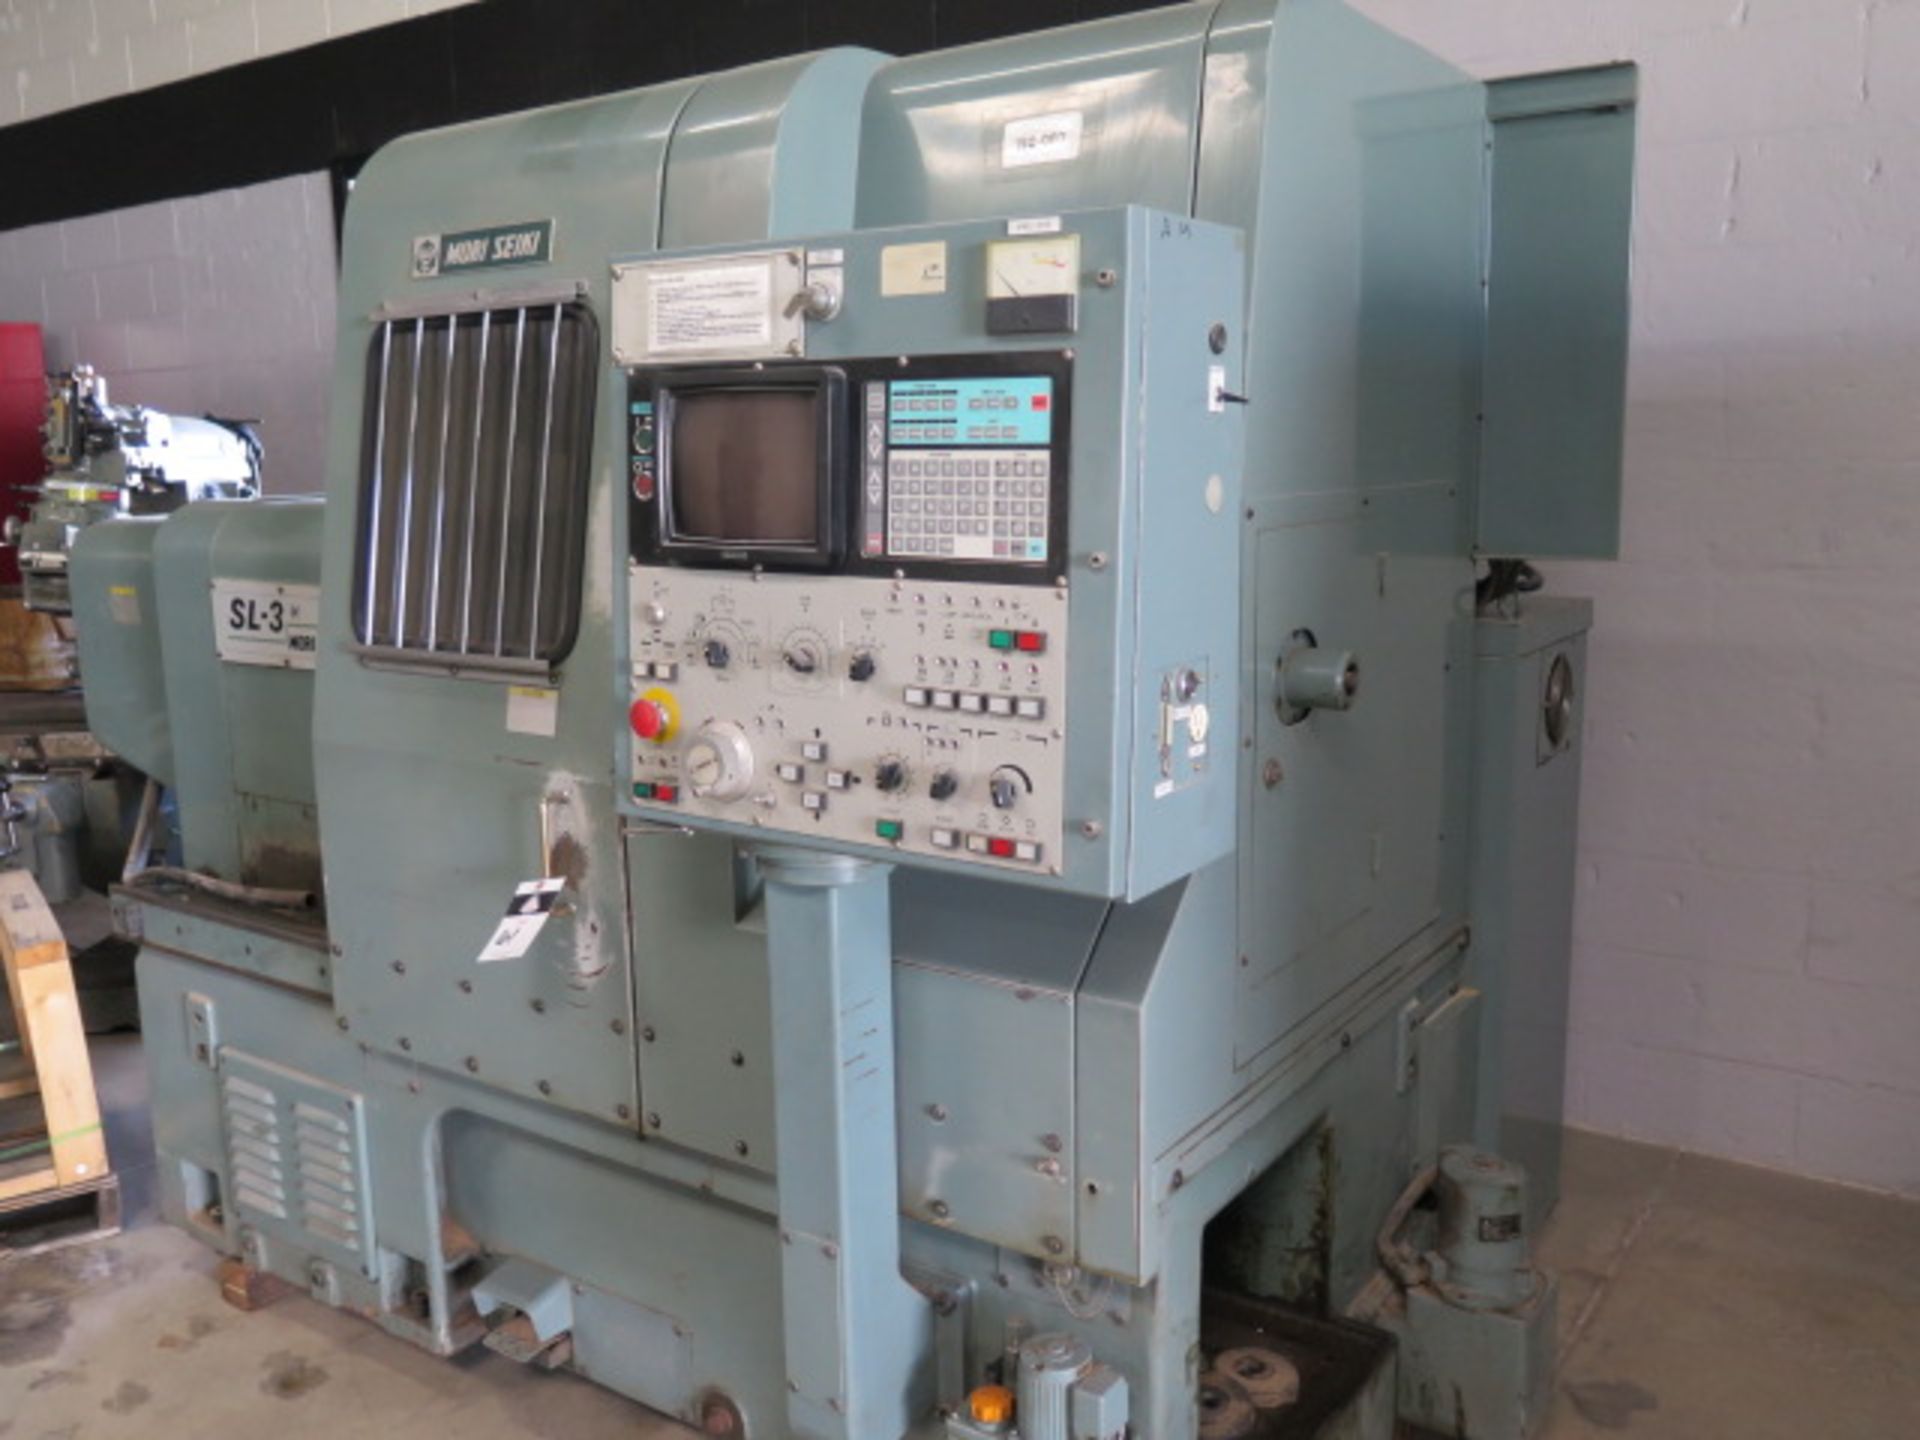 Mori Seiki SL-3H CNC Turning Center s/n 5331 w/ Yasnac Controls, 12-Station Turret, SOLD AS IS - Image 2 of 15